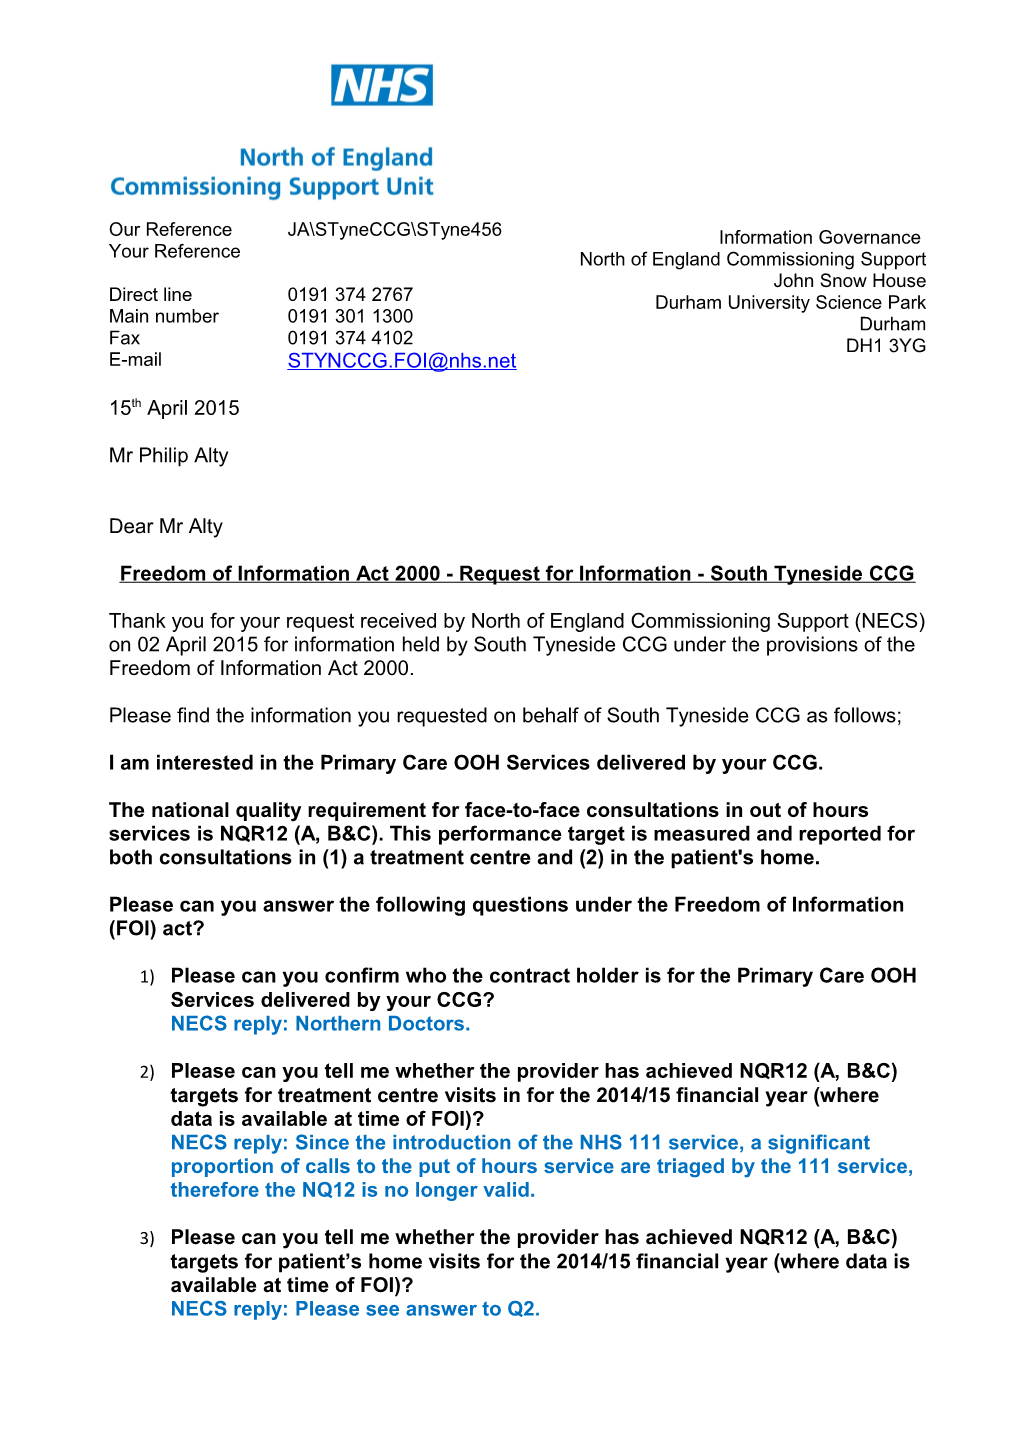 Freedom of Information Act 2000 - Request for Information - South Tyneside CCG